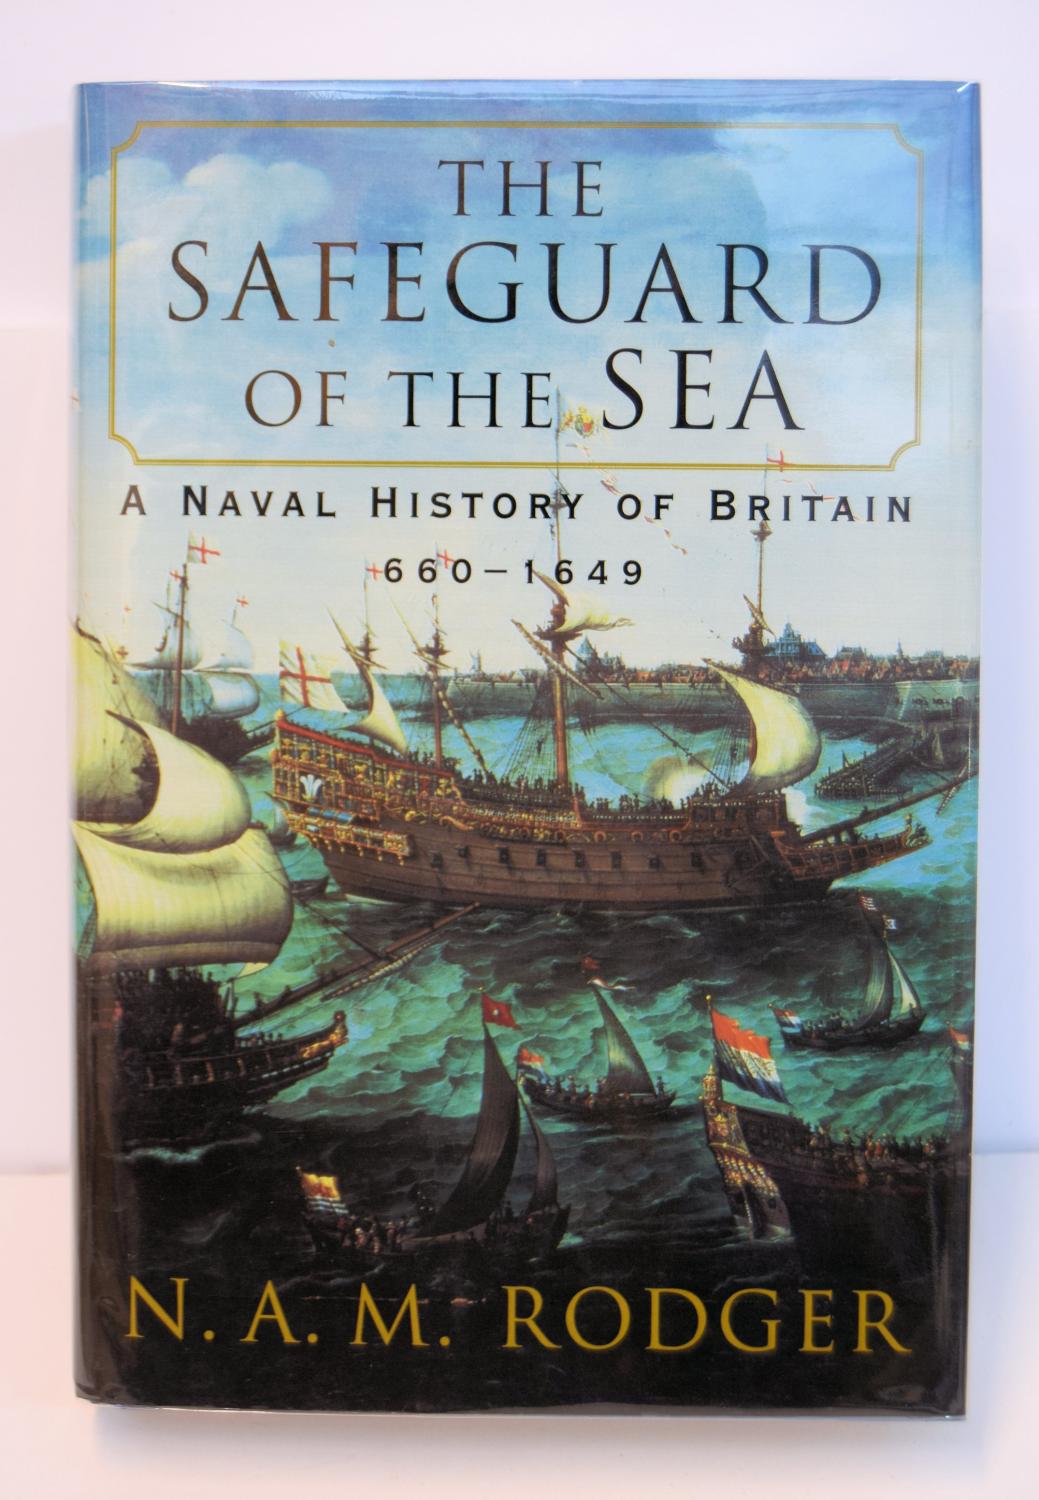 THE SAFEGUARD OF THE SEA. A NAVAL HISTORY OF BRITAIN 660-1649. - RODGER, N. A. M.